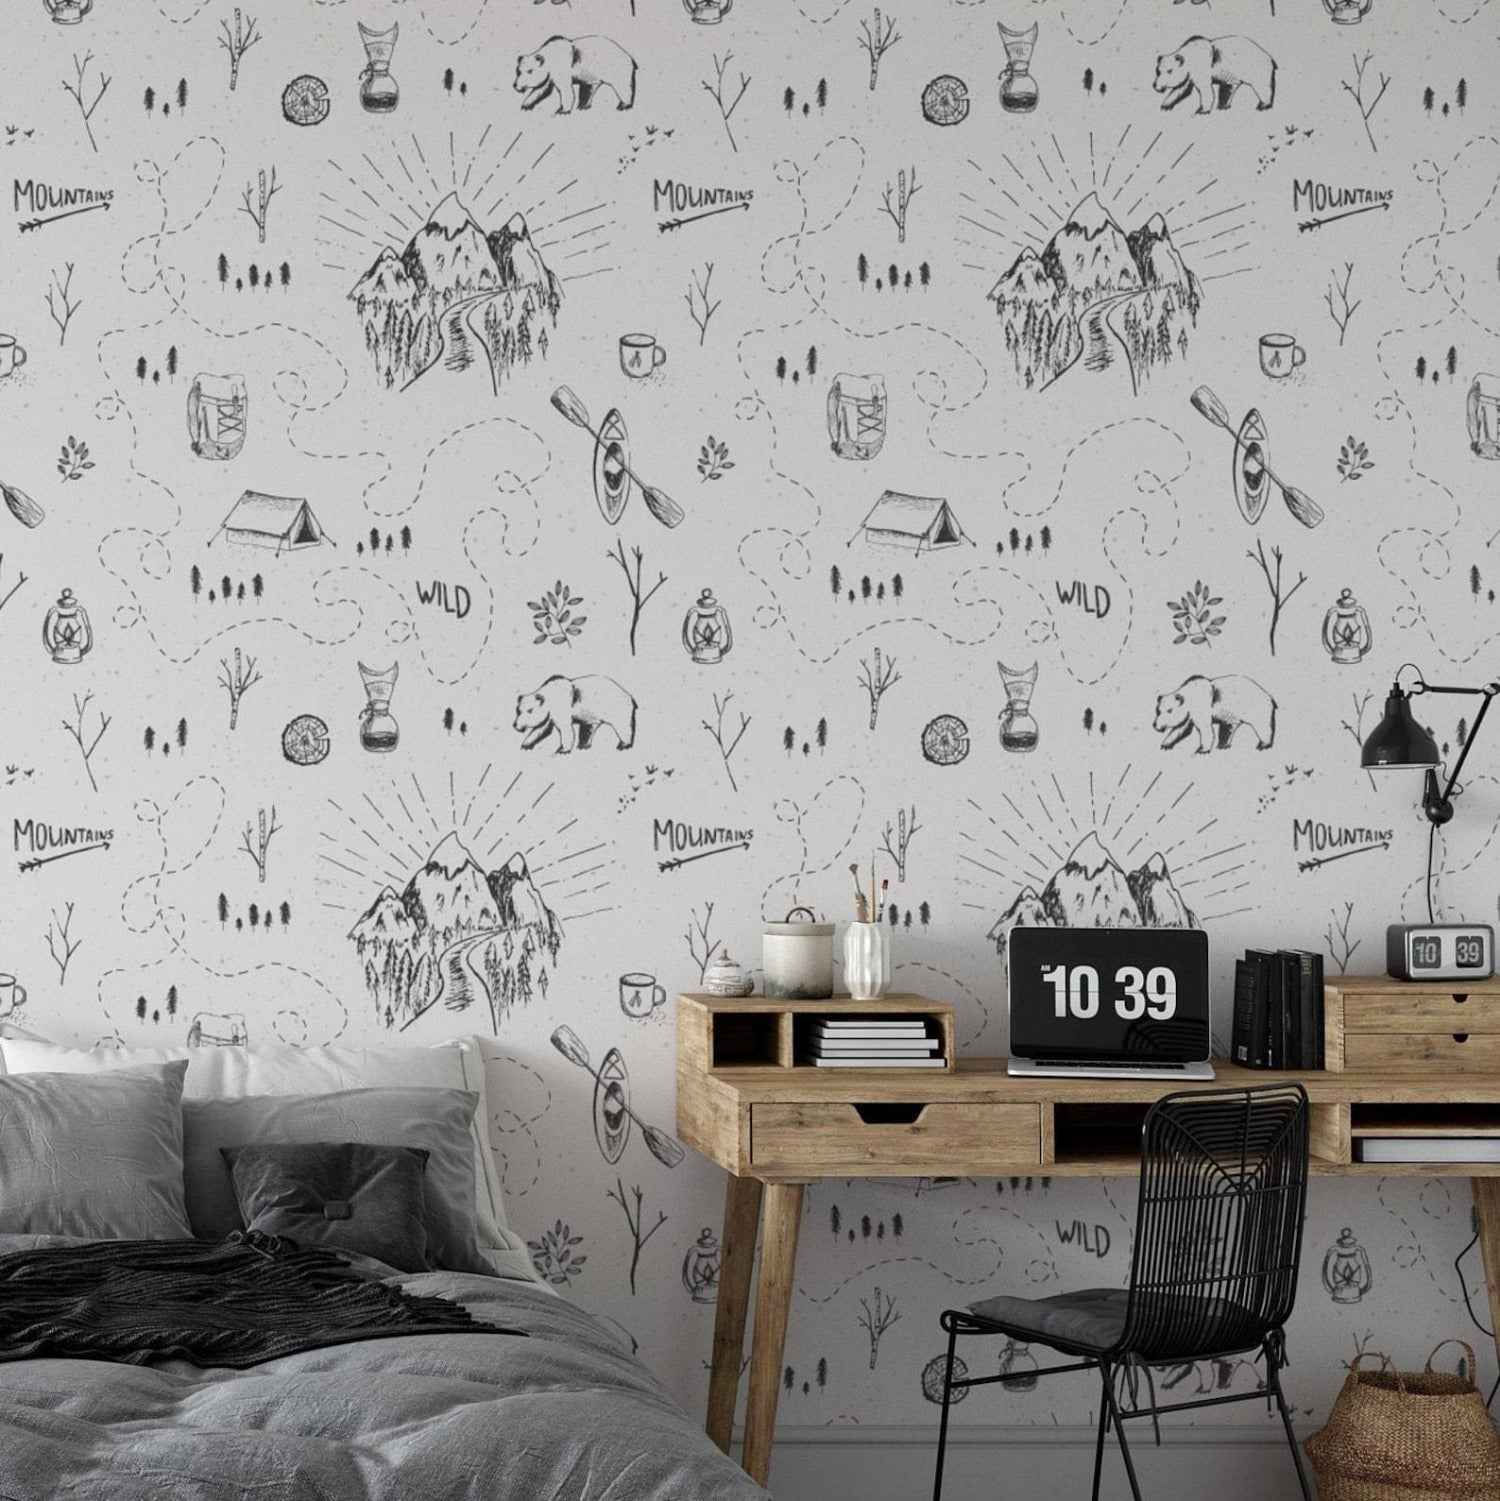 The Big Adventure Kids Wallpaper is featured in a cozy bedroom setup with a modern wooden desk and stylish decor, infusing the space with a sense of adventure through its charming and intricate line drawings of wilderness scenes.